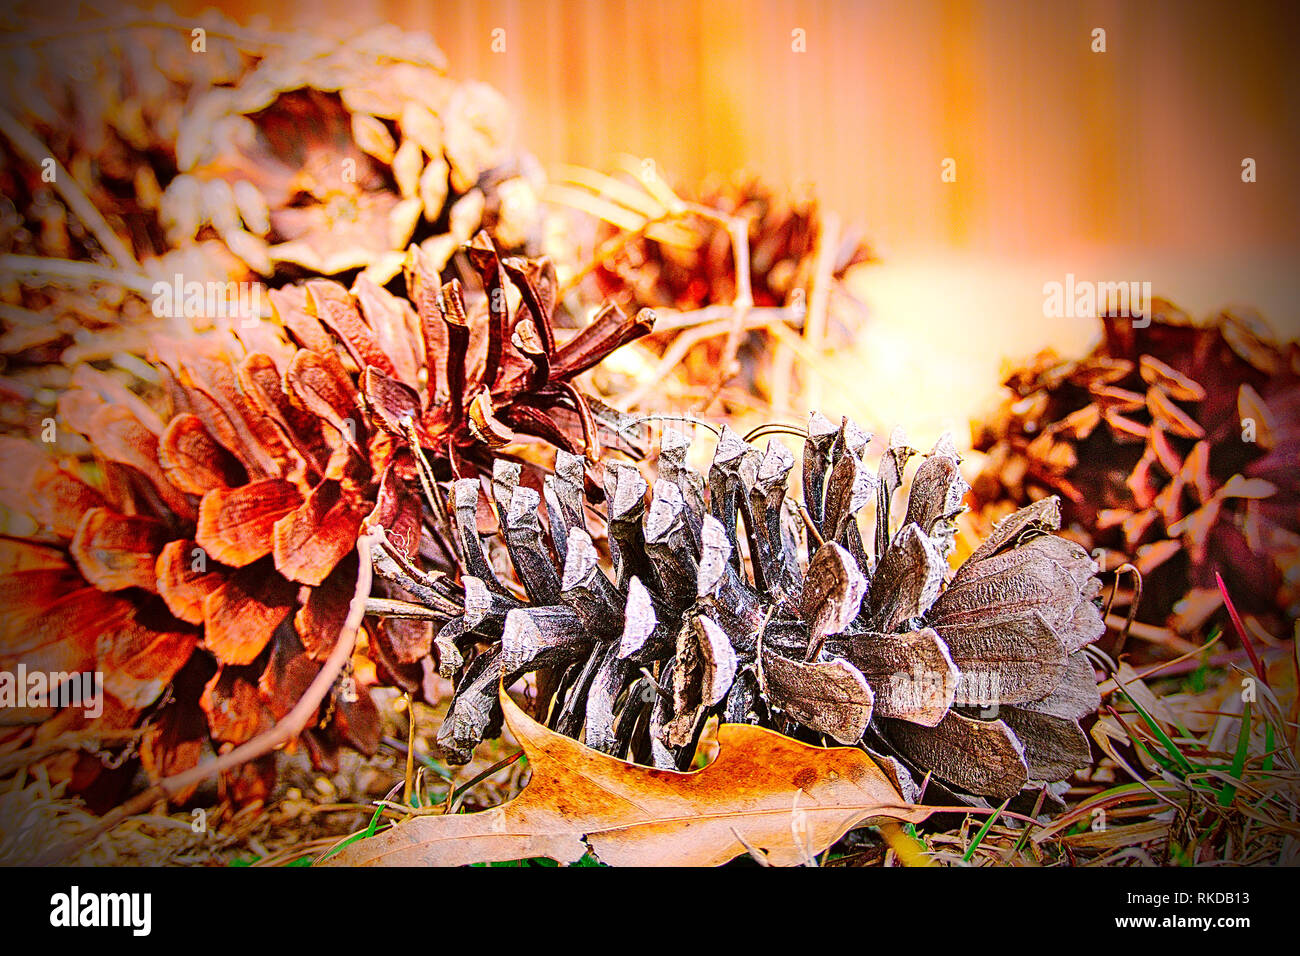 Close-up of several pinecones on the ground entangled in vines with the focus on two pinecones. Stock Photo